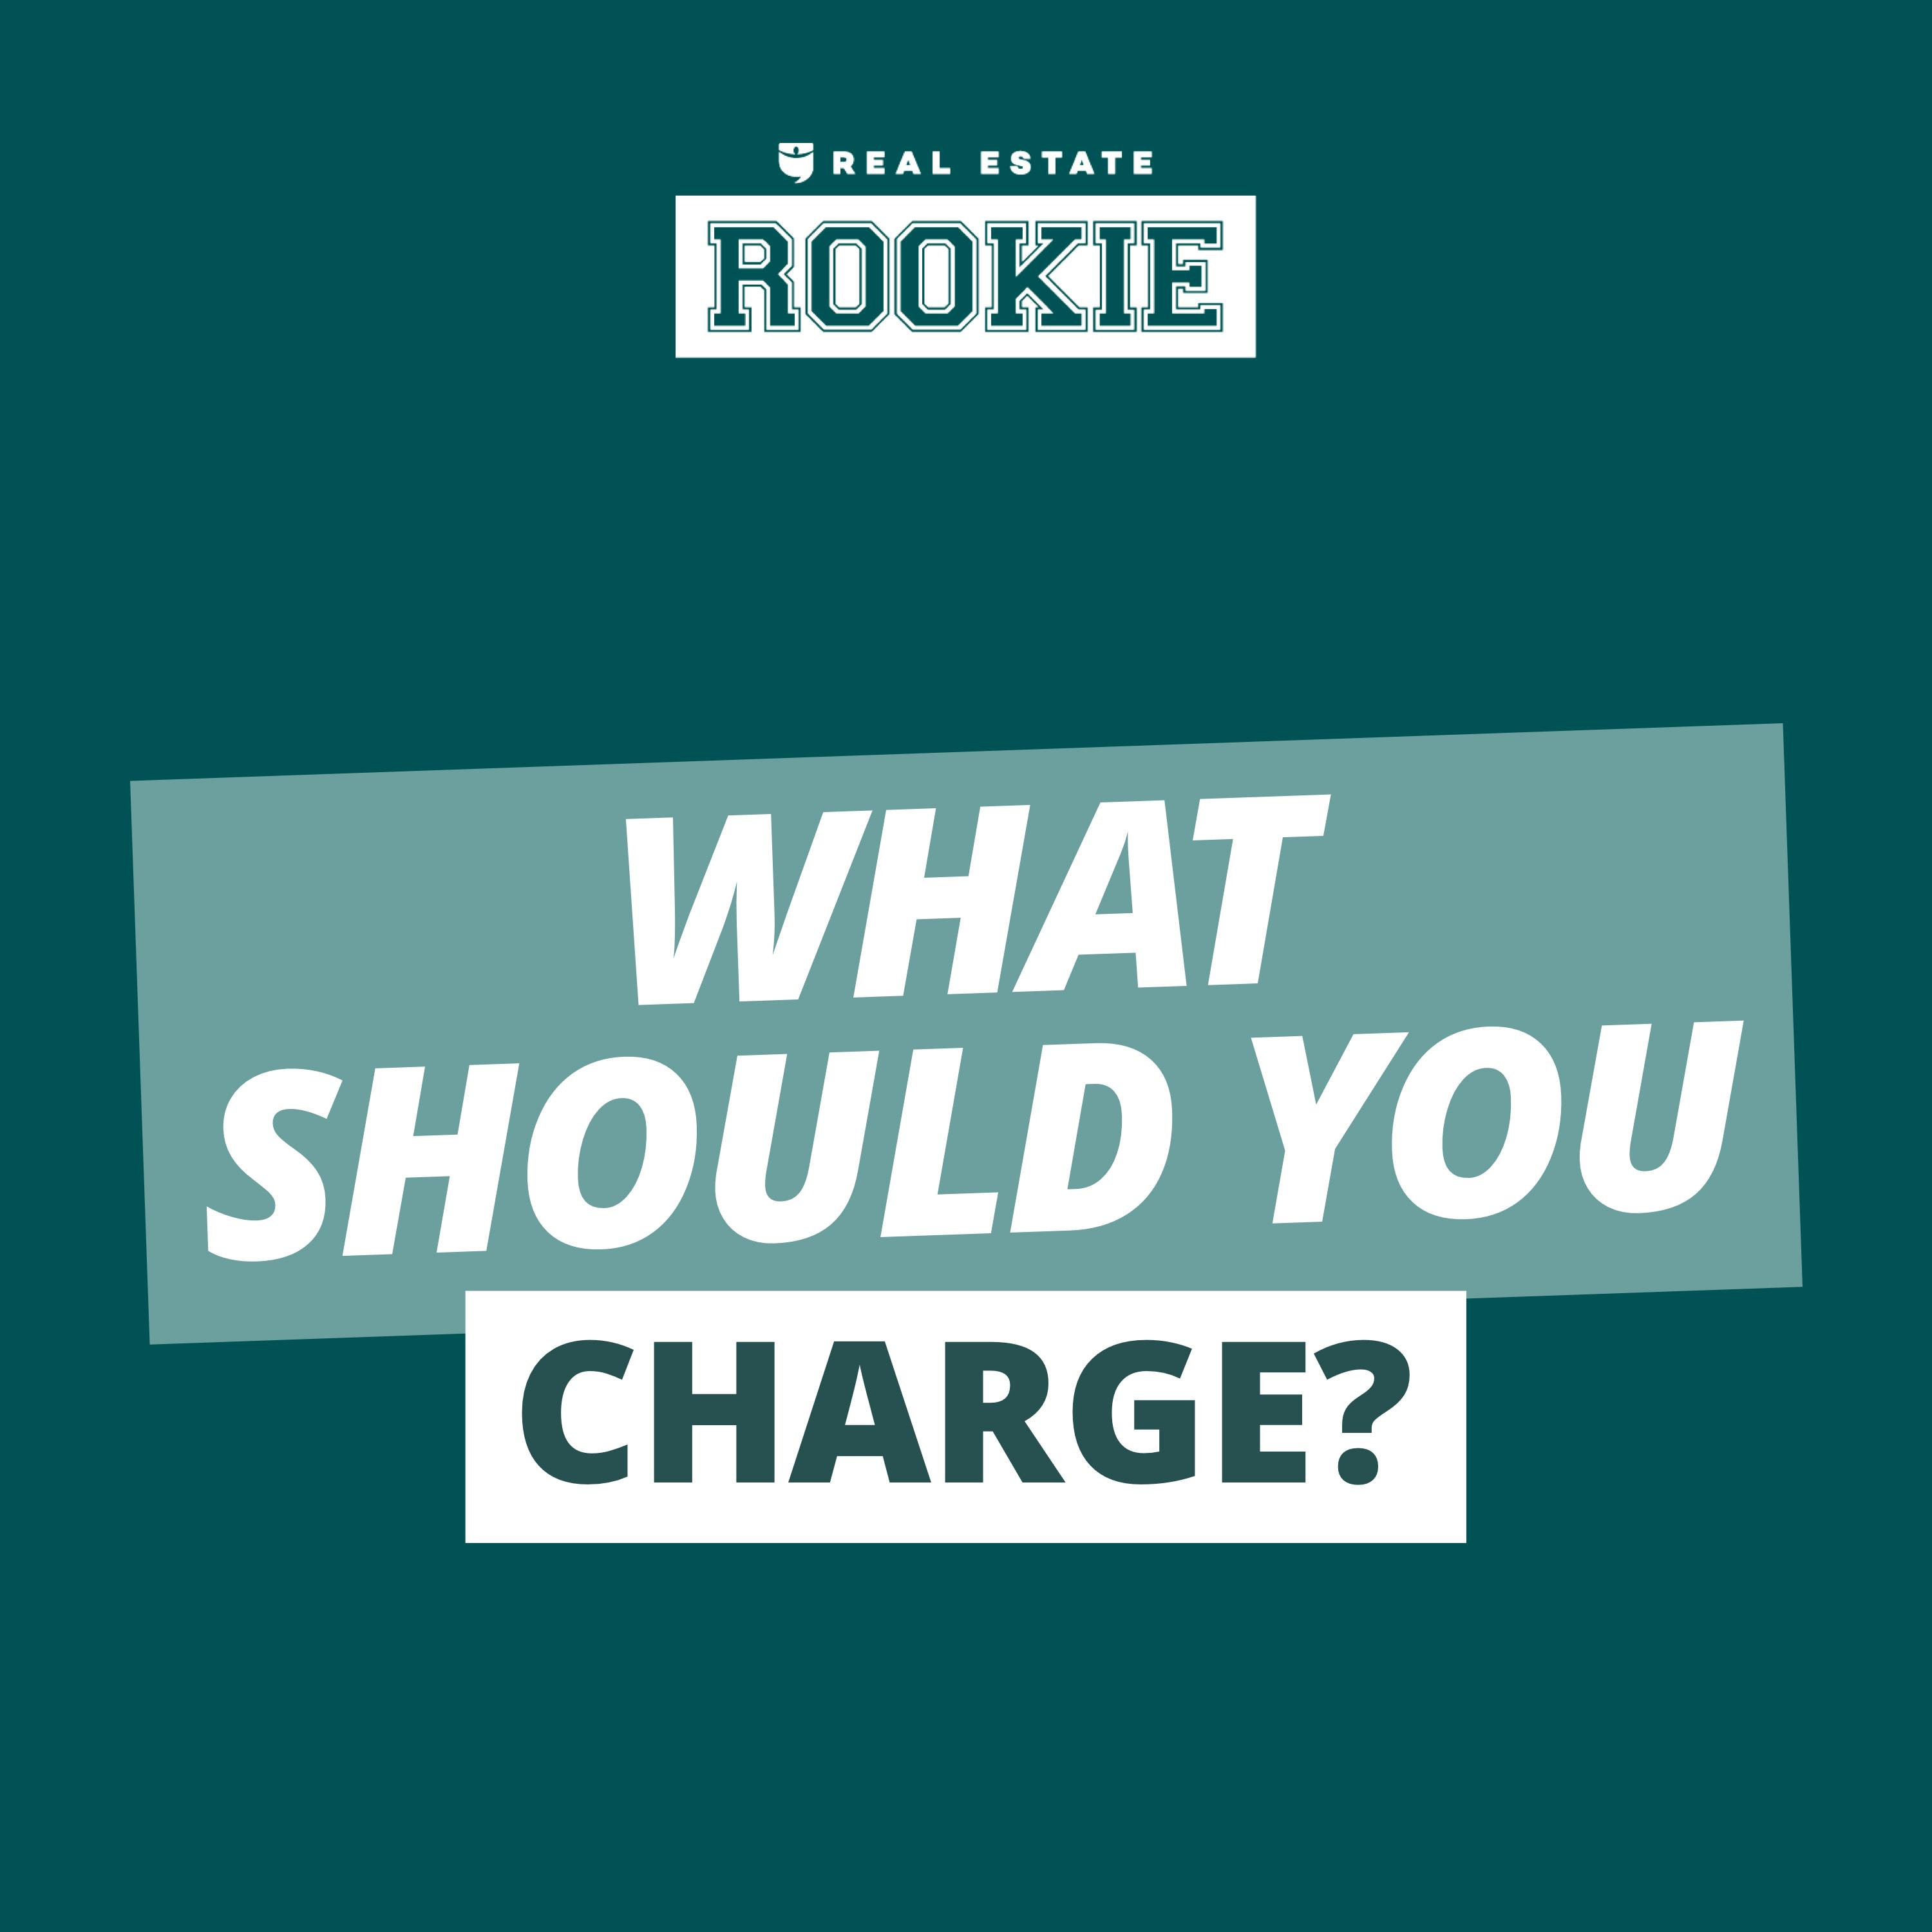 138: Rookie Reply: How Do I Find Rental Comps for My Property?